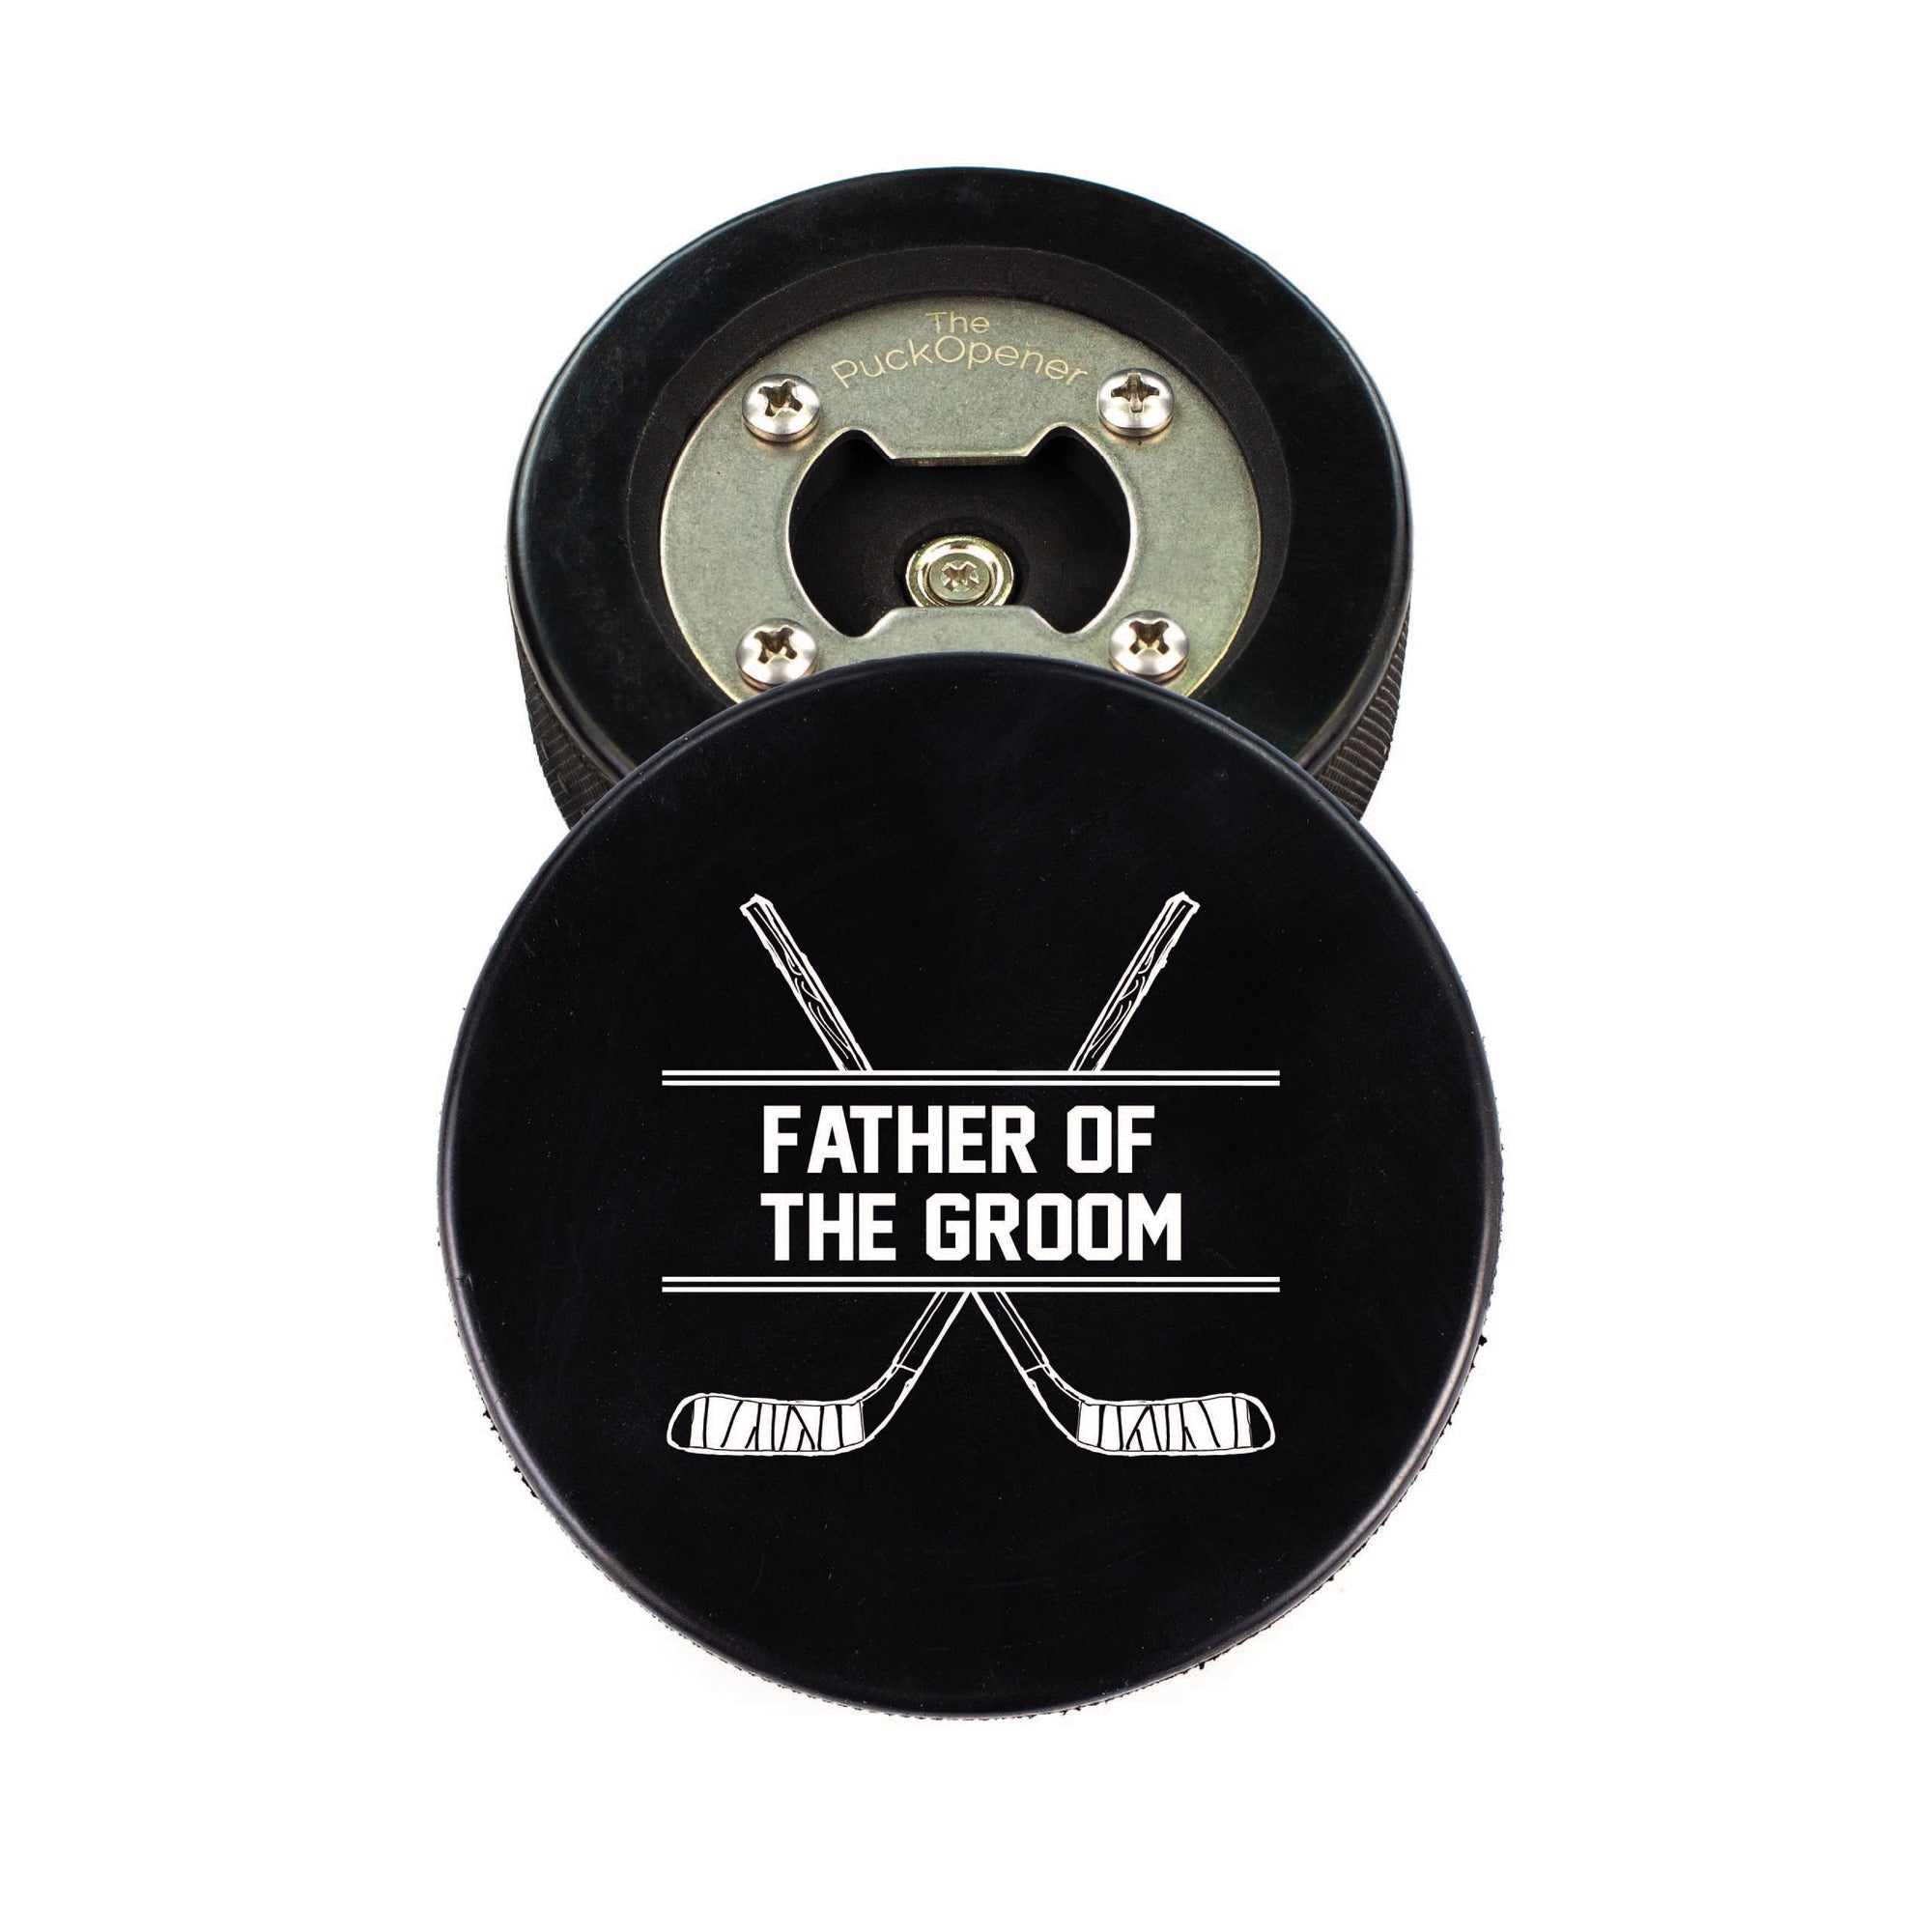 Hockey Puck Bottle Opener with Father of the Groom Hockey Stick Design